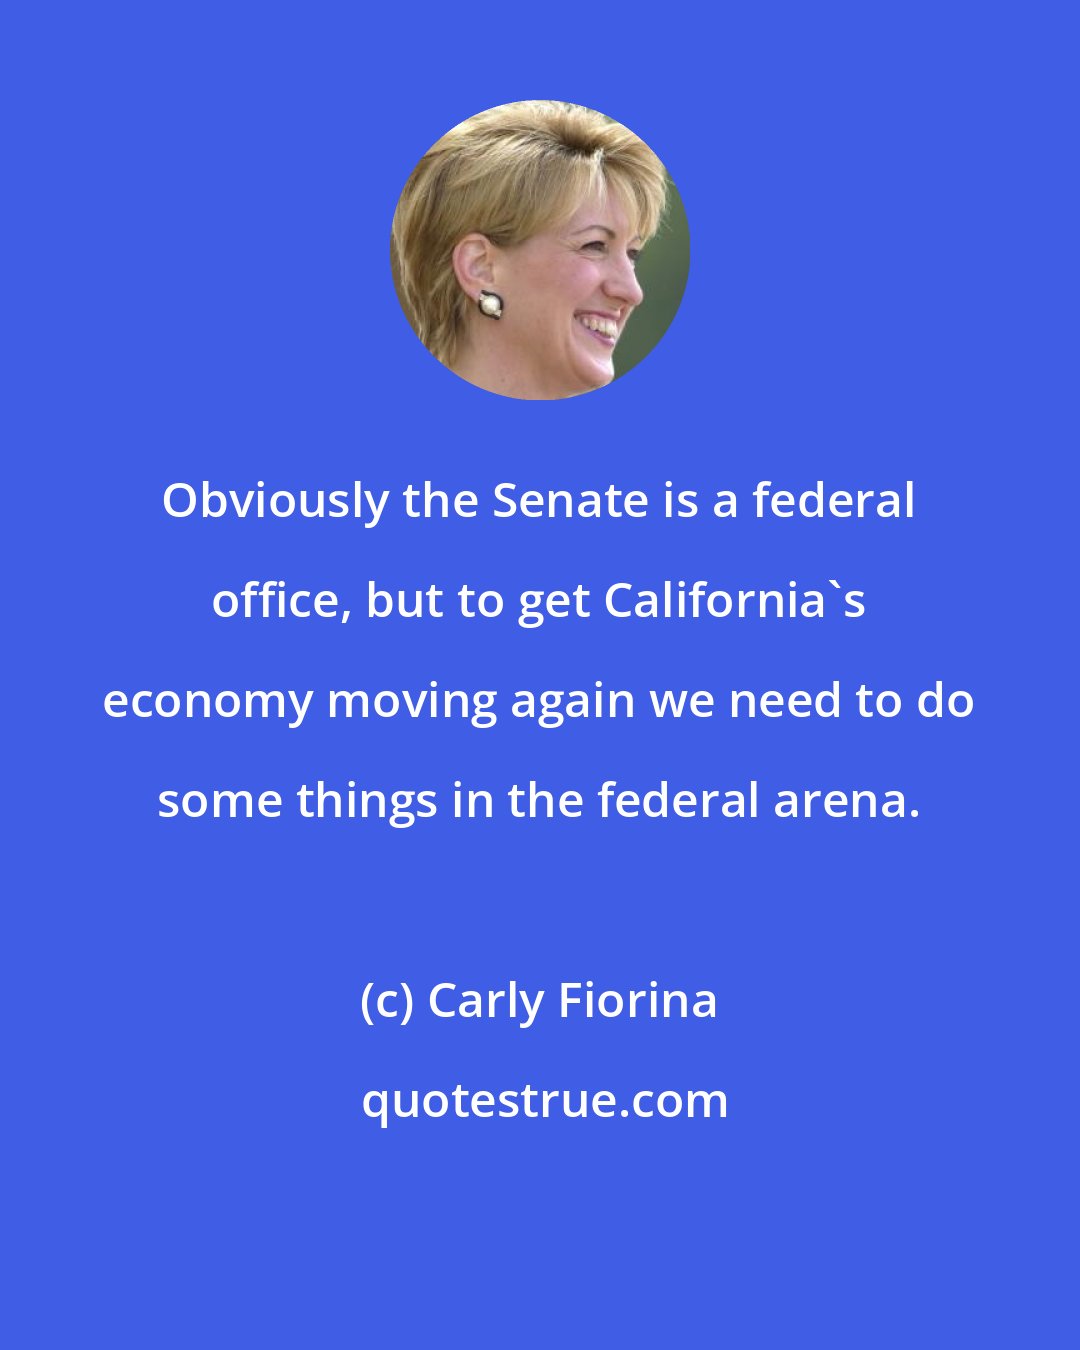 Carly Fiorina: Obviously the Senate is a federal office, but to get California's economy moving again we need to do some things in the federal arena.